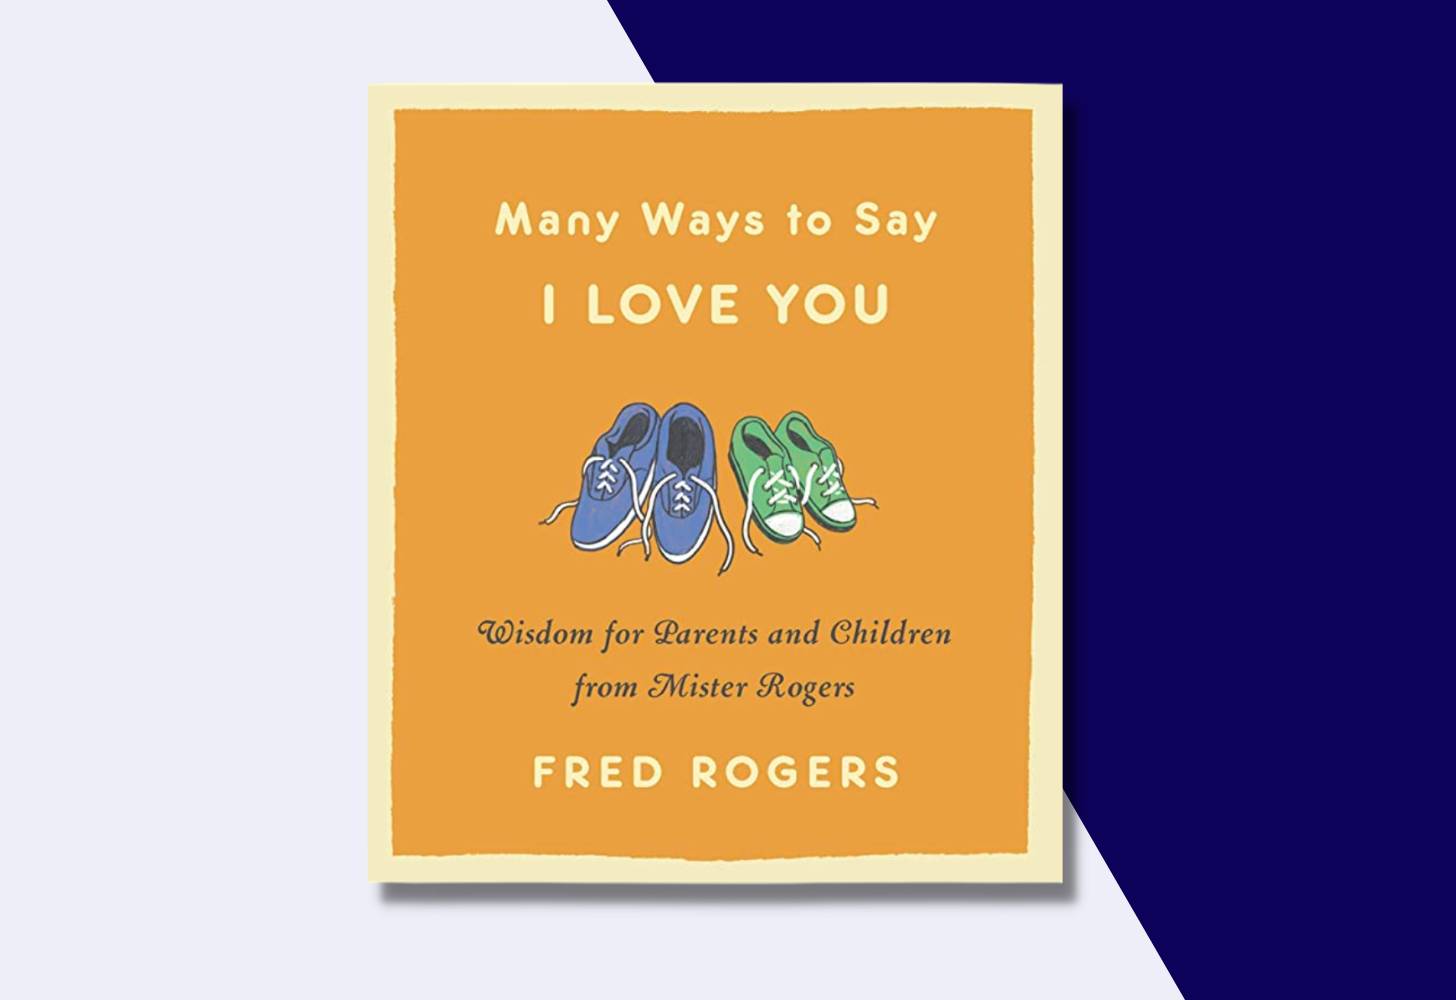 “Many Ways to Say I Love You: Wisdom for Parents and Children from Mister Rogers” by Fred Rogers 